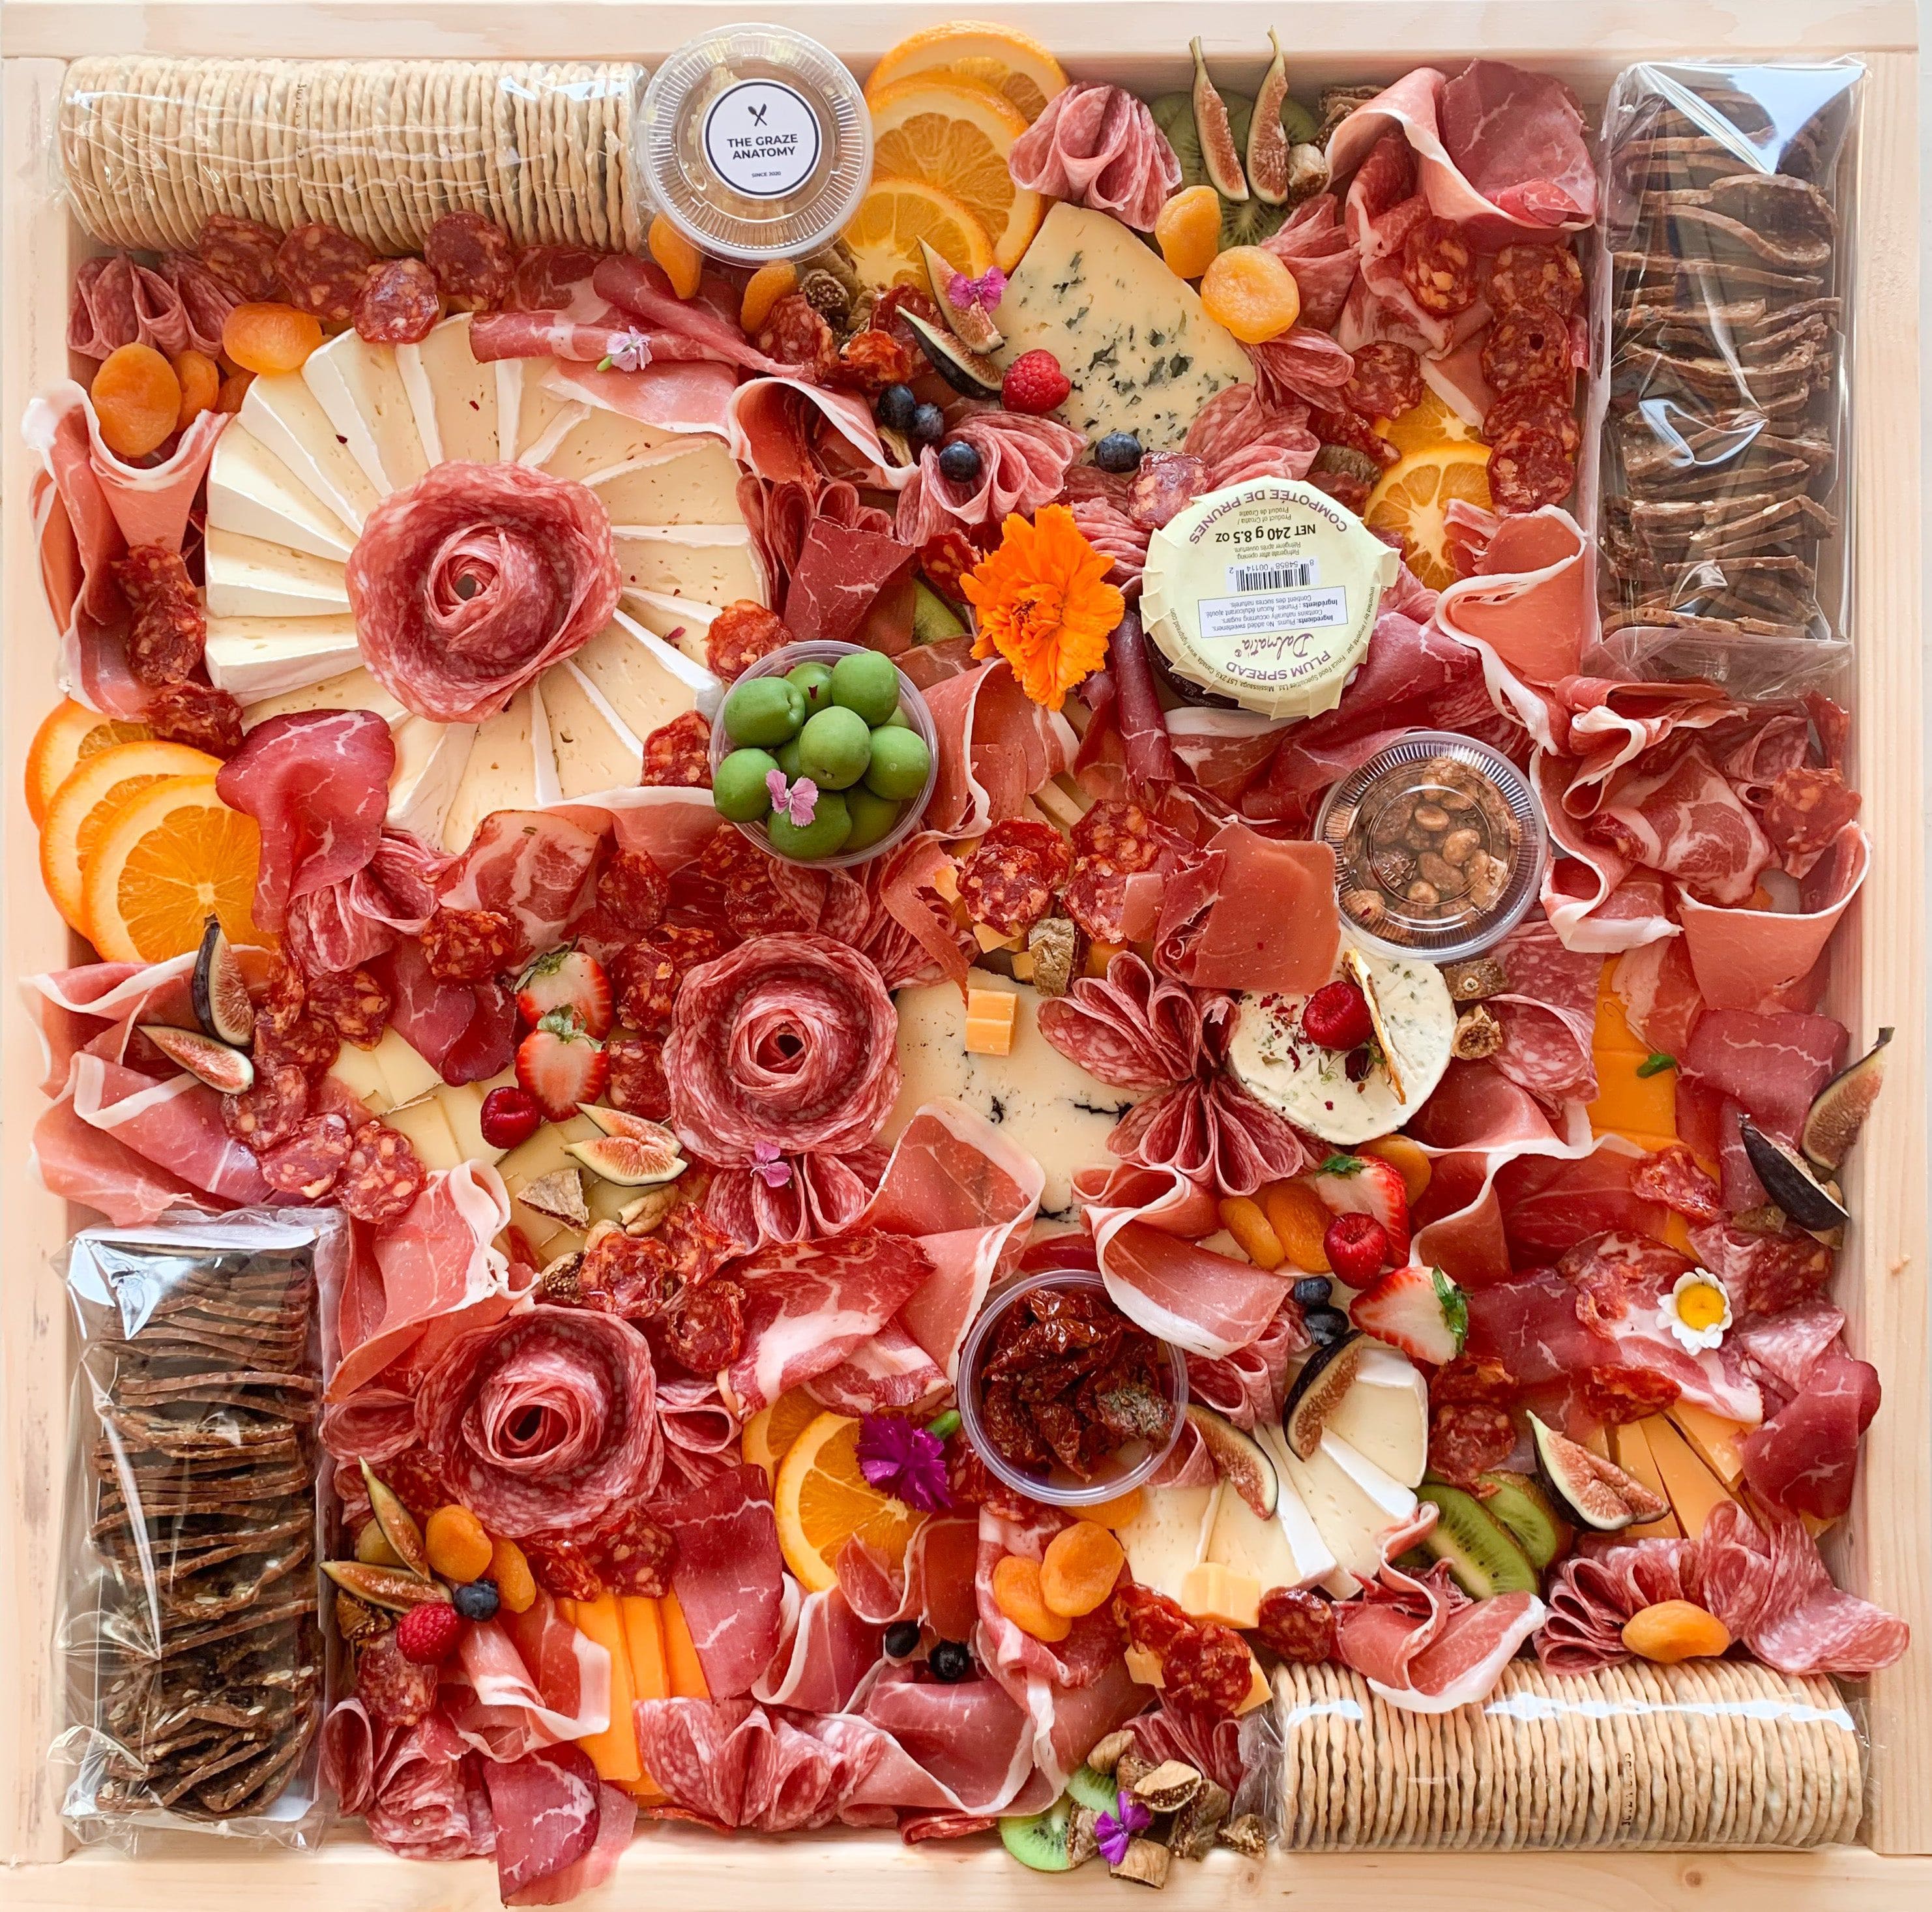 Best large charcuterie board for 30 - 35 guests in Toronto Ontario